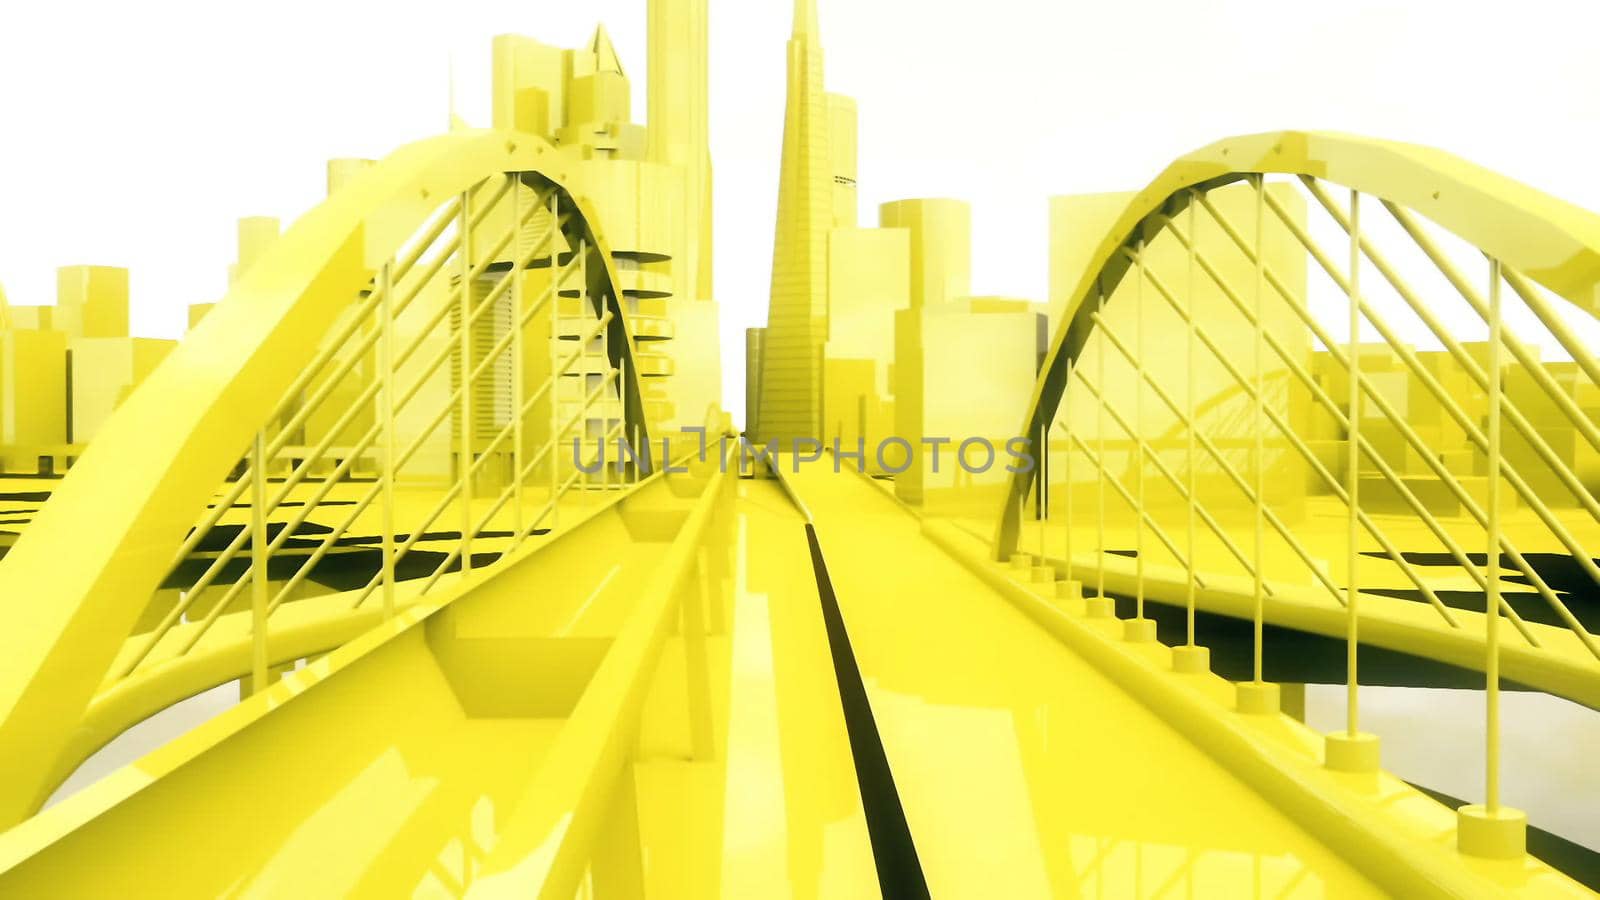 scene of the abstract urban yellow city buildings